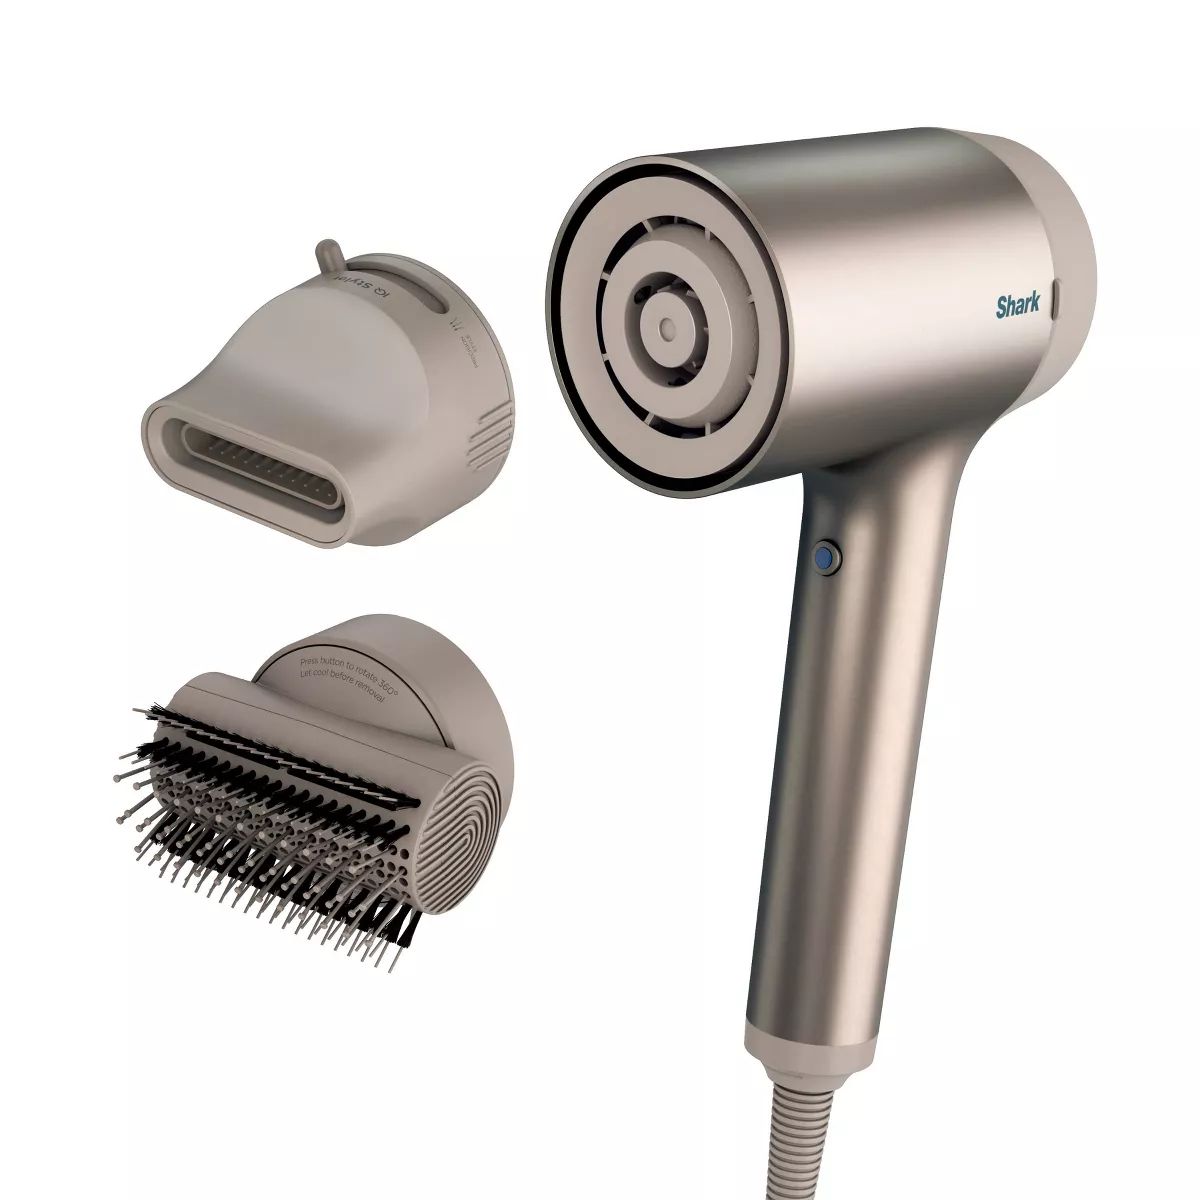 Shark Hyper Air Ionic Hair Dryer with IQ 2-in-1 Concentrator and Styling Brush Attachment - Beige | Target